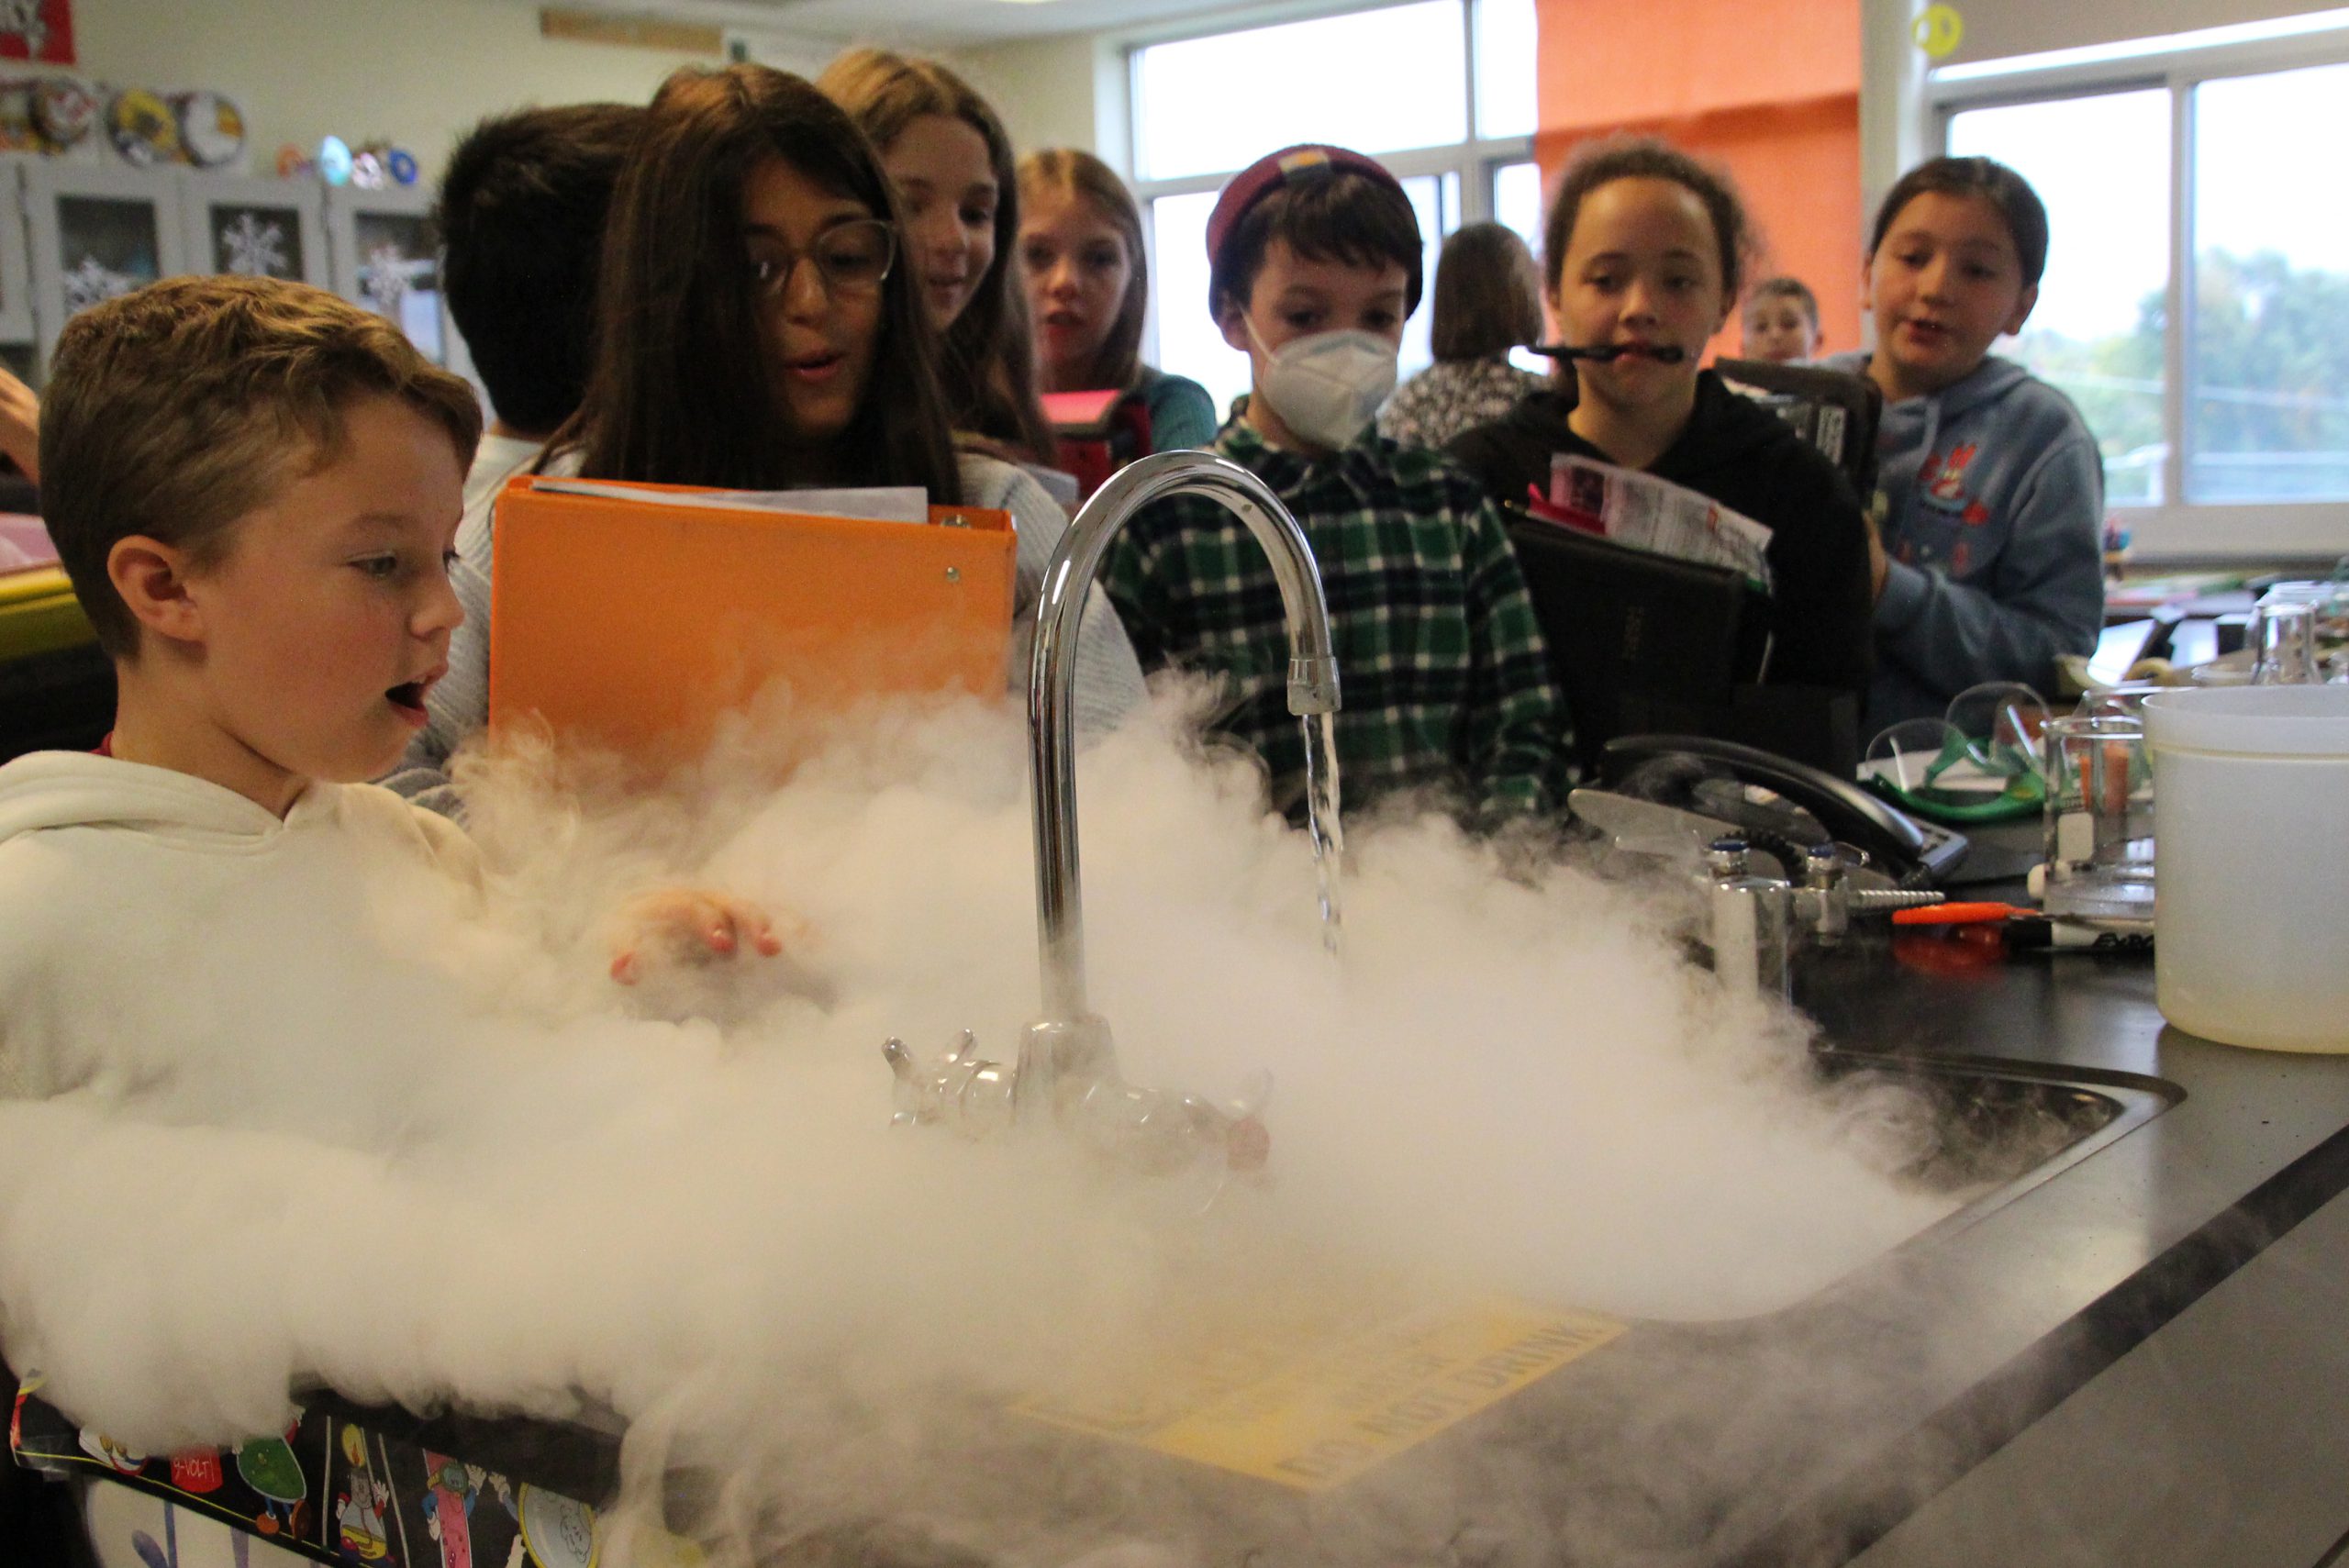 Action shot of a smoky science experiment in action